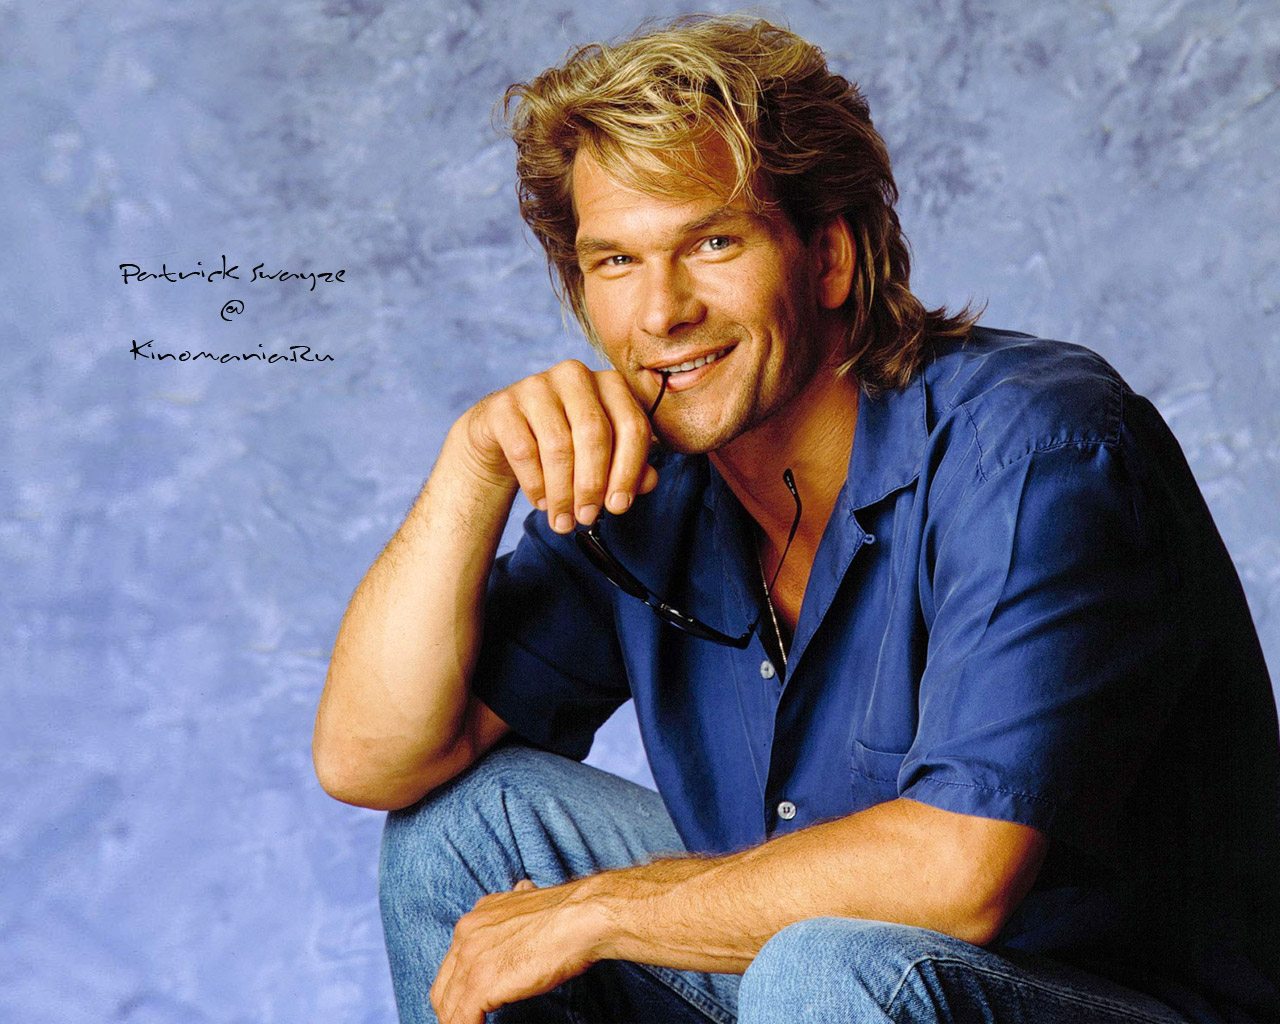 Patrick Swayze Image HD Wallpaper And Background